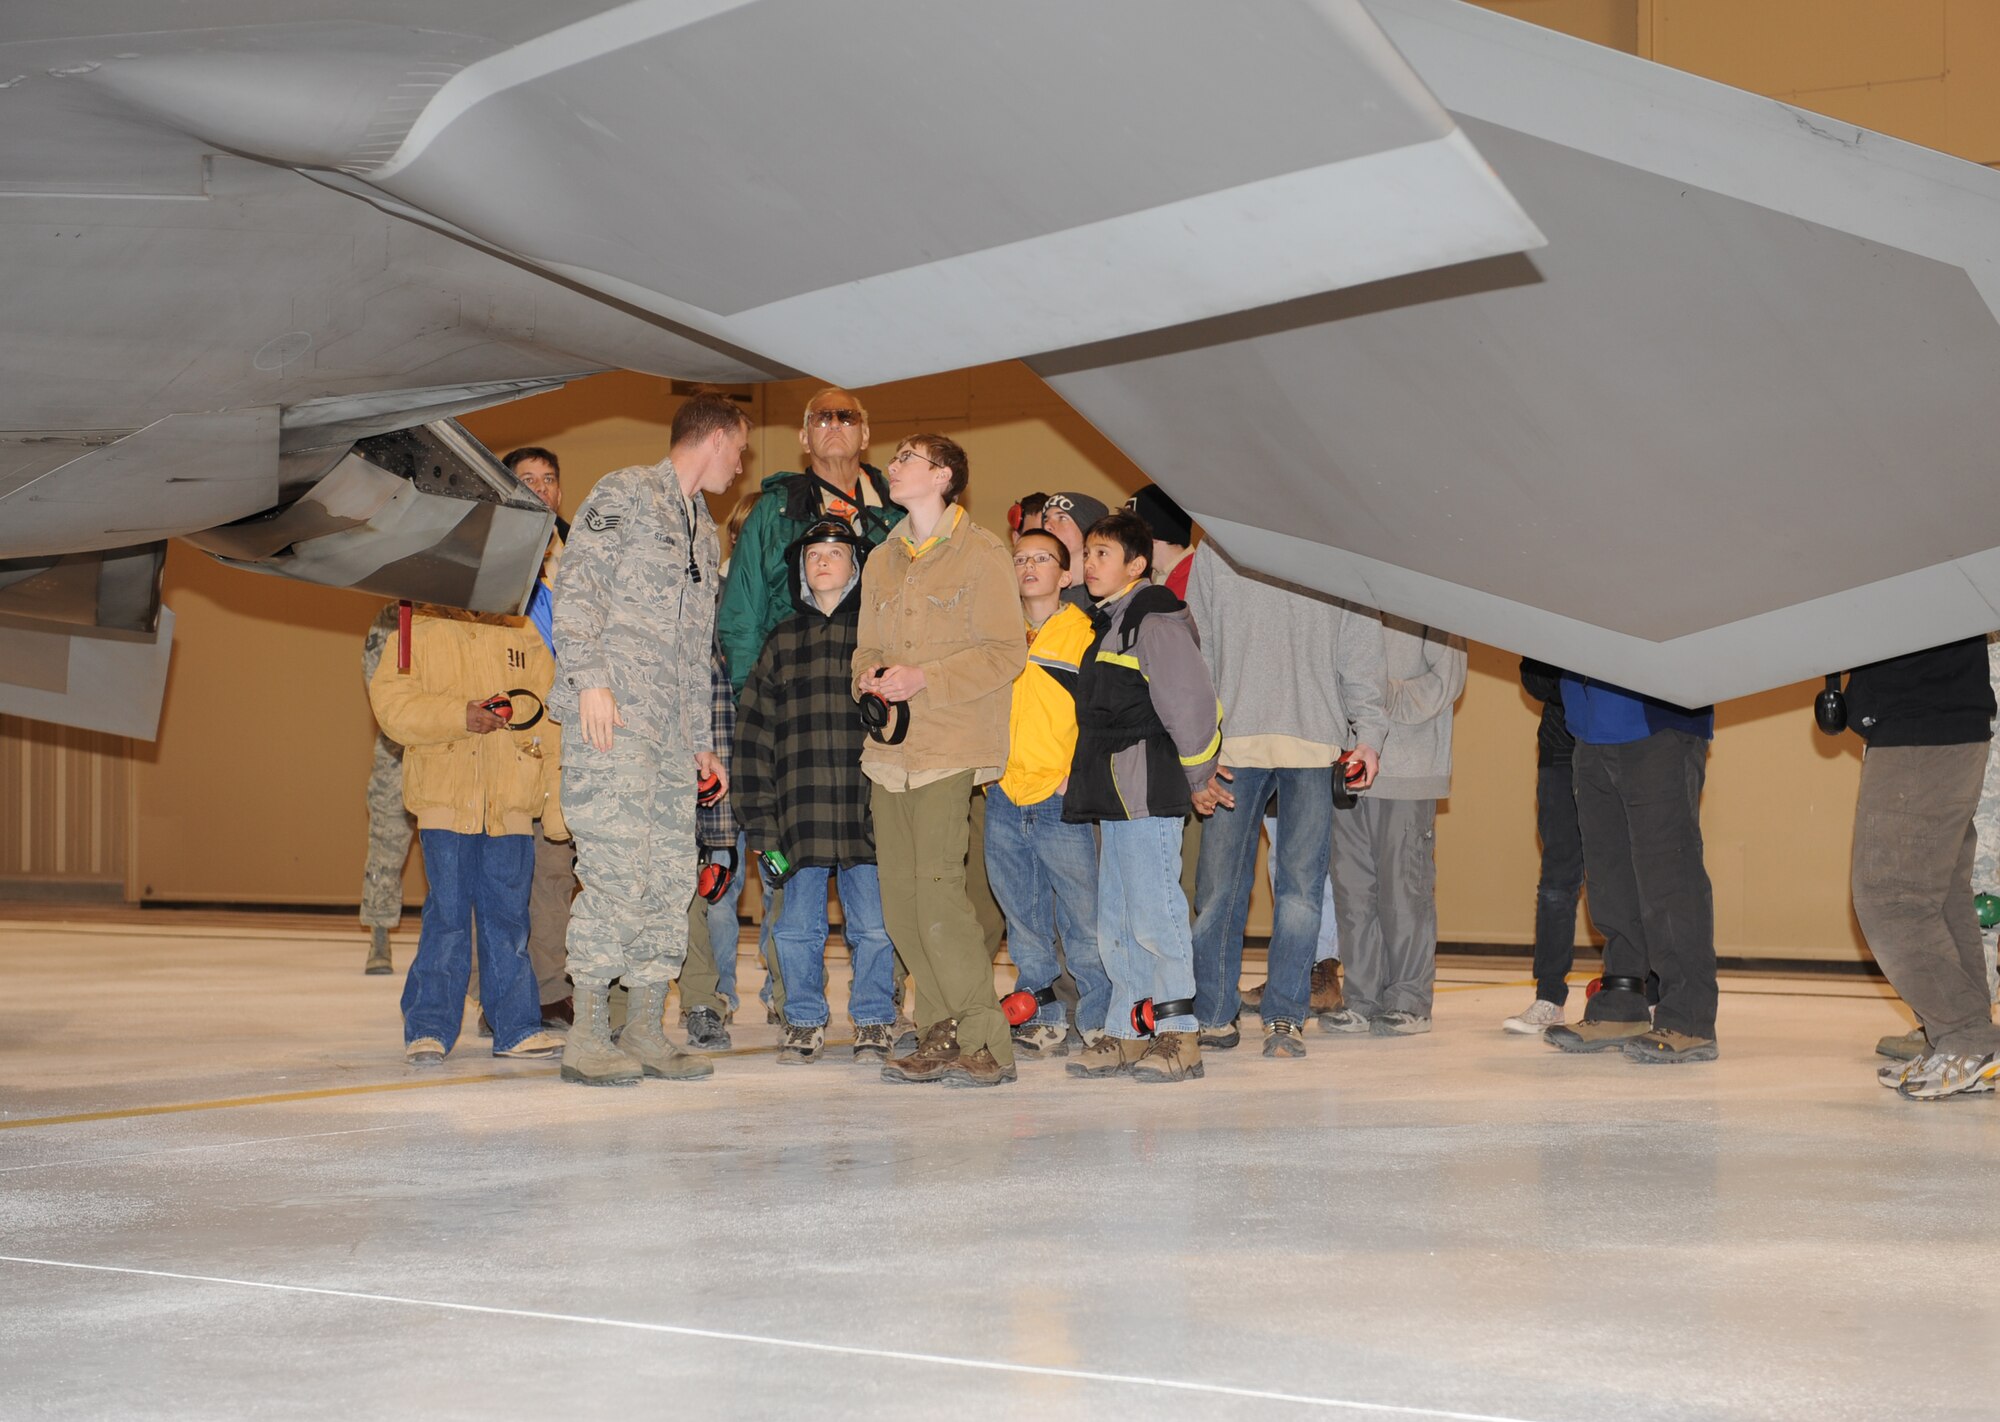 Staff Sgt. Matthew St John, 49th Maintenance Operations Squadron, briefs Boy Scout Troop 174, based out of Albuquerque, N.M., on the F-22A Raptor's capabilities during an F-22A Familiarization Course March 27 at Holloman Air Force Base, N.M. The troop also stopped to see the High Speed Test Track during their visit to Holloman.